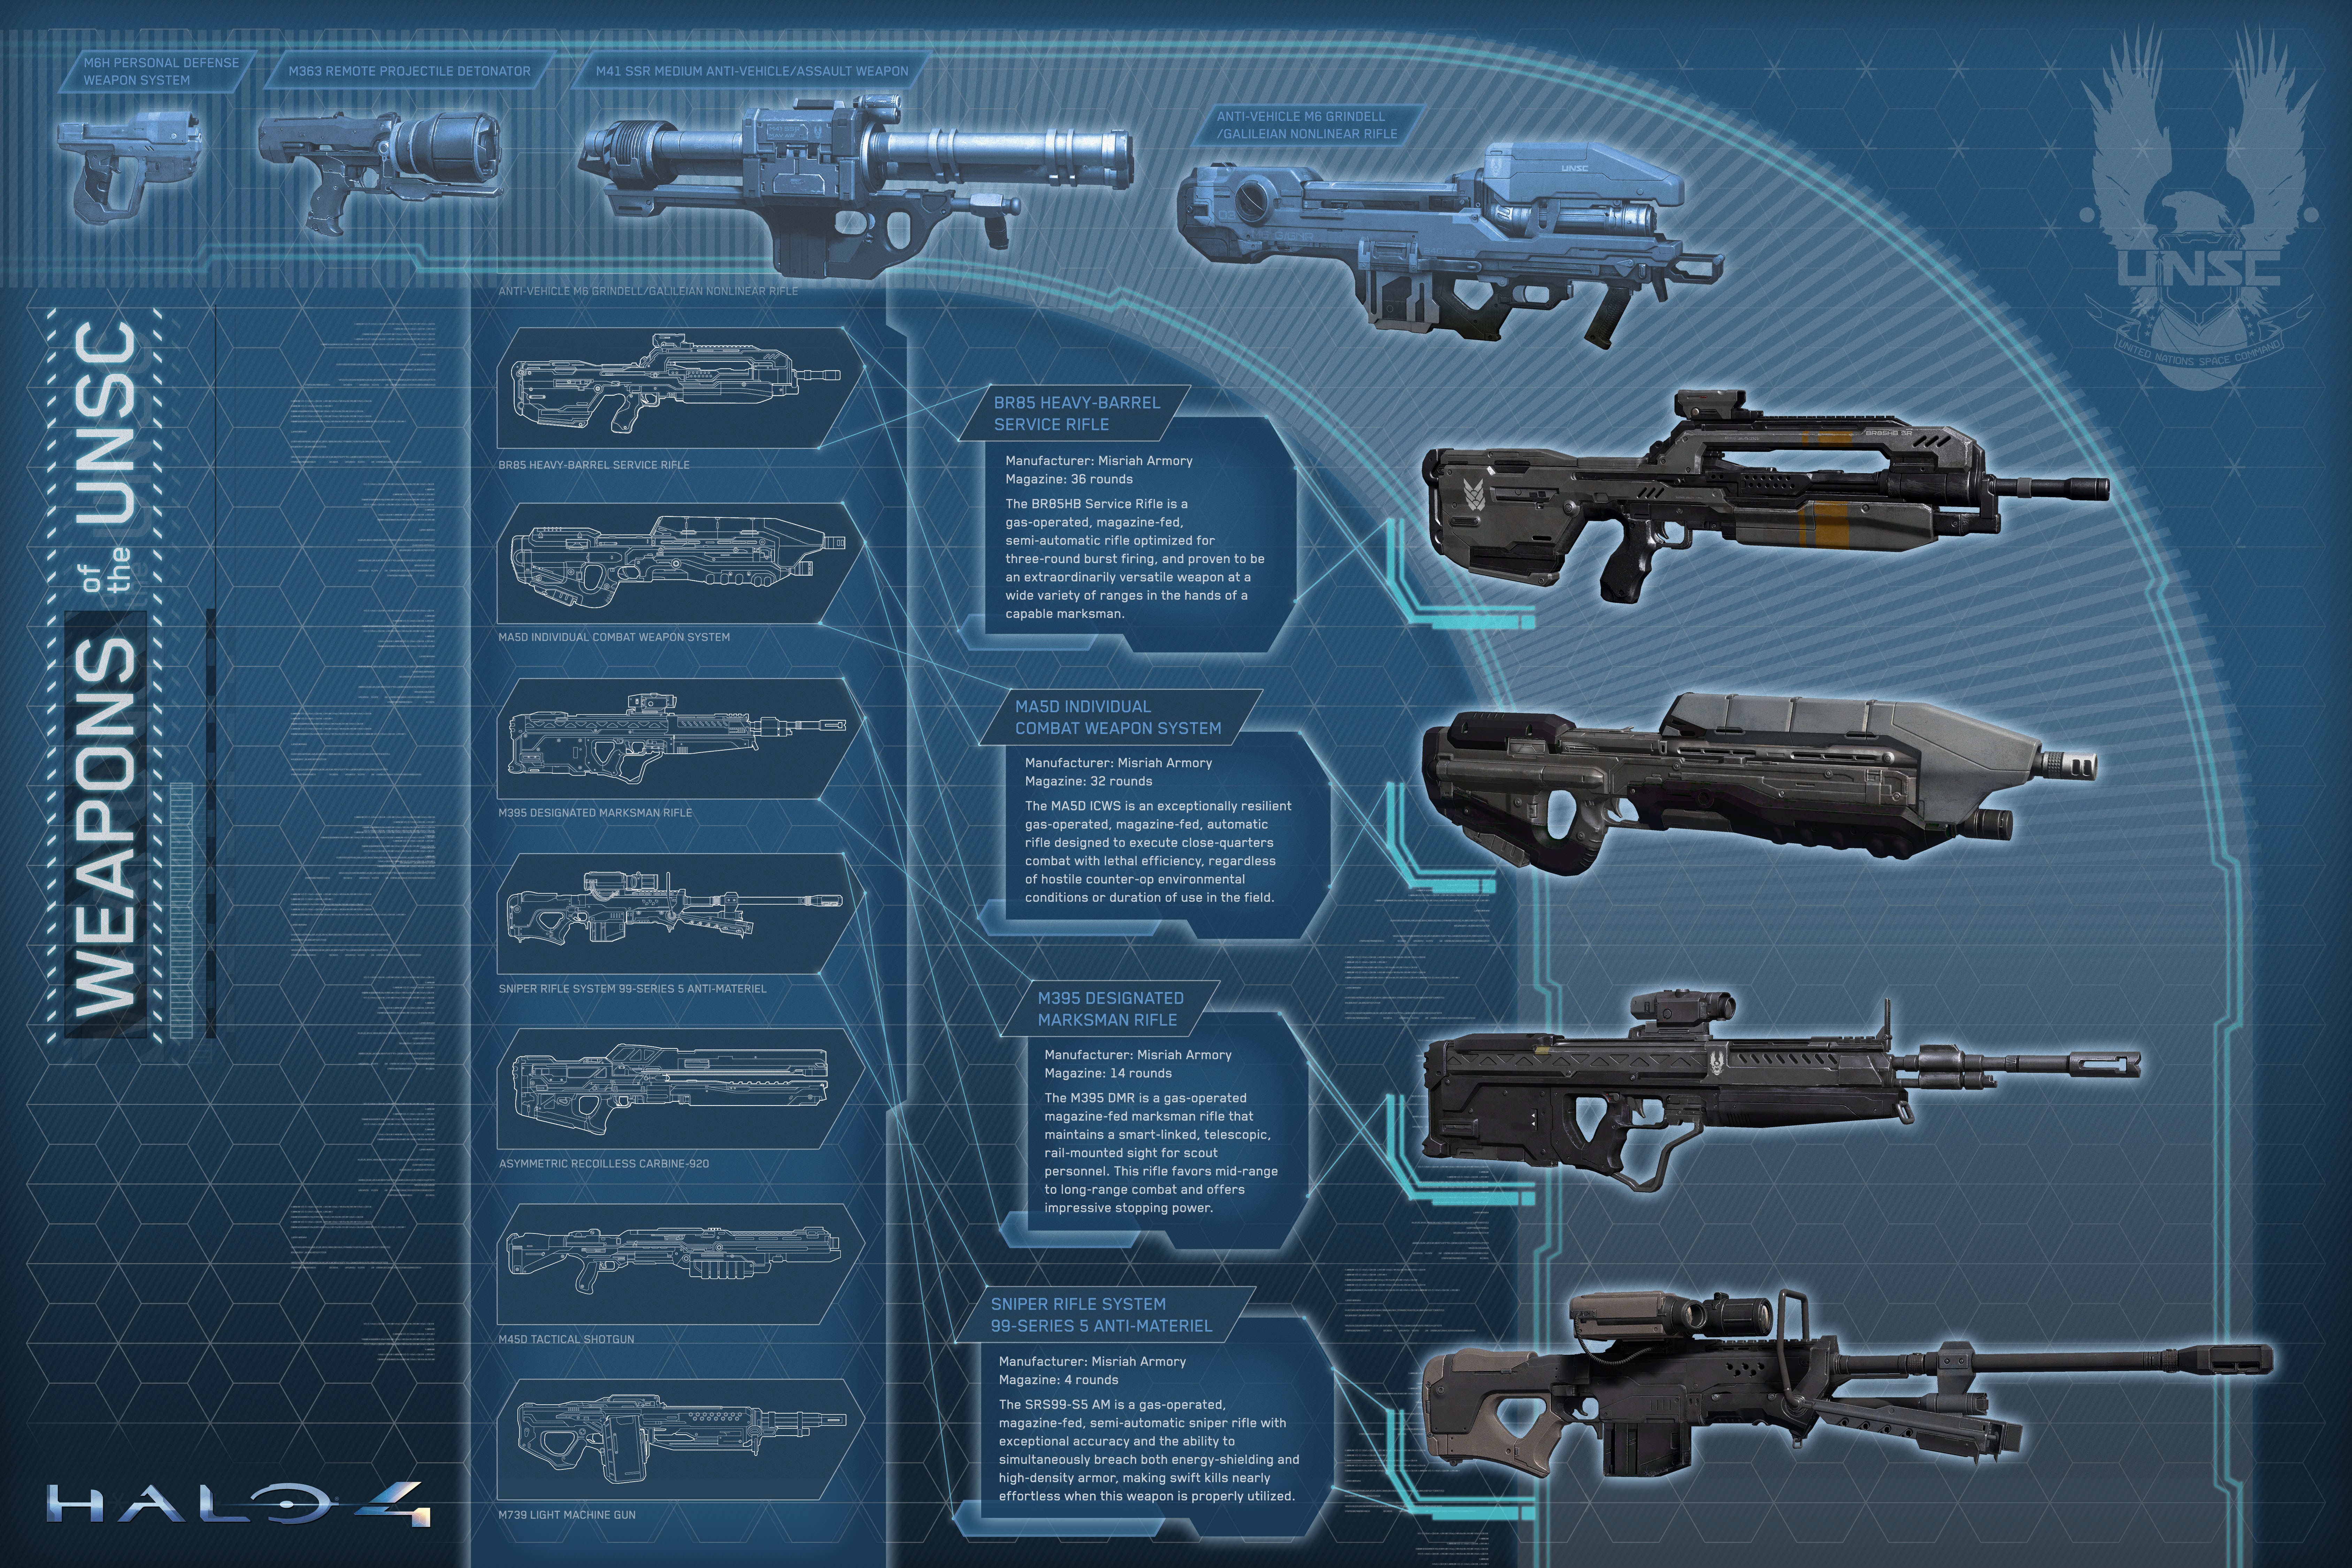 Halo 4 UNSC 343 Industries Weapon 6750x4500